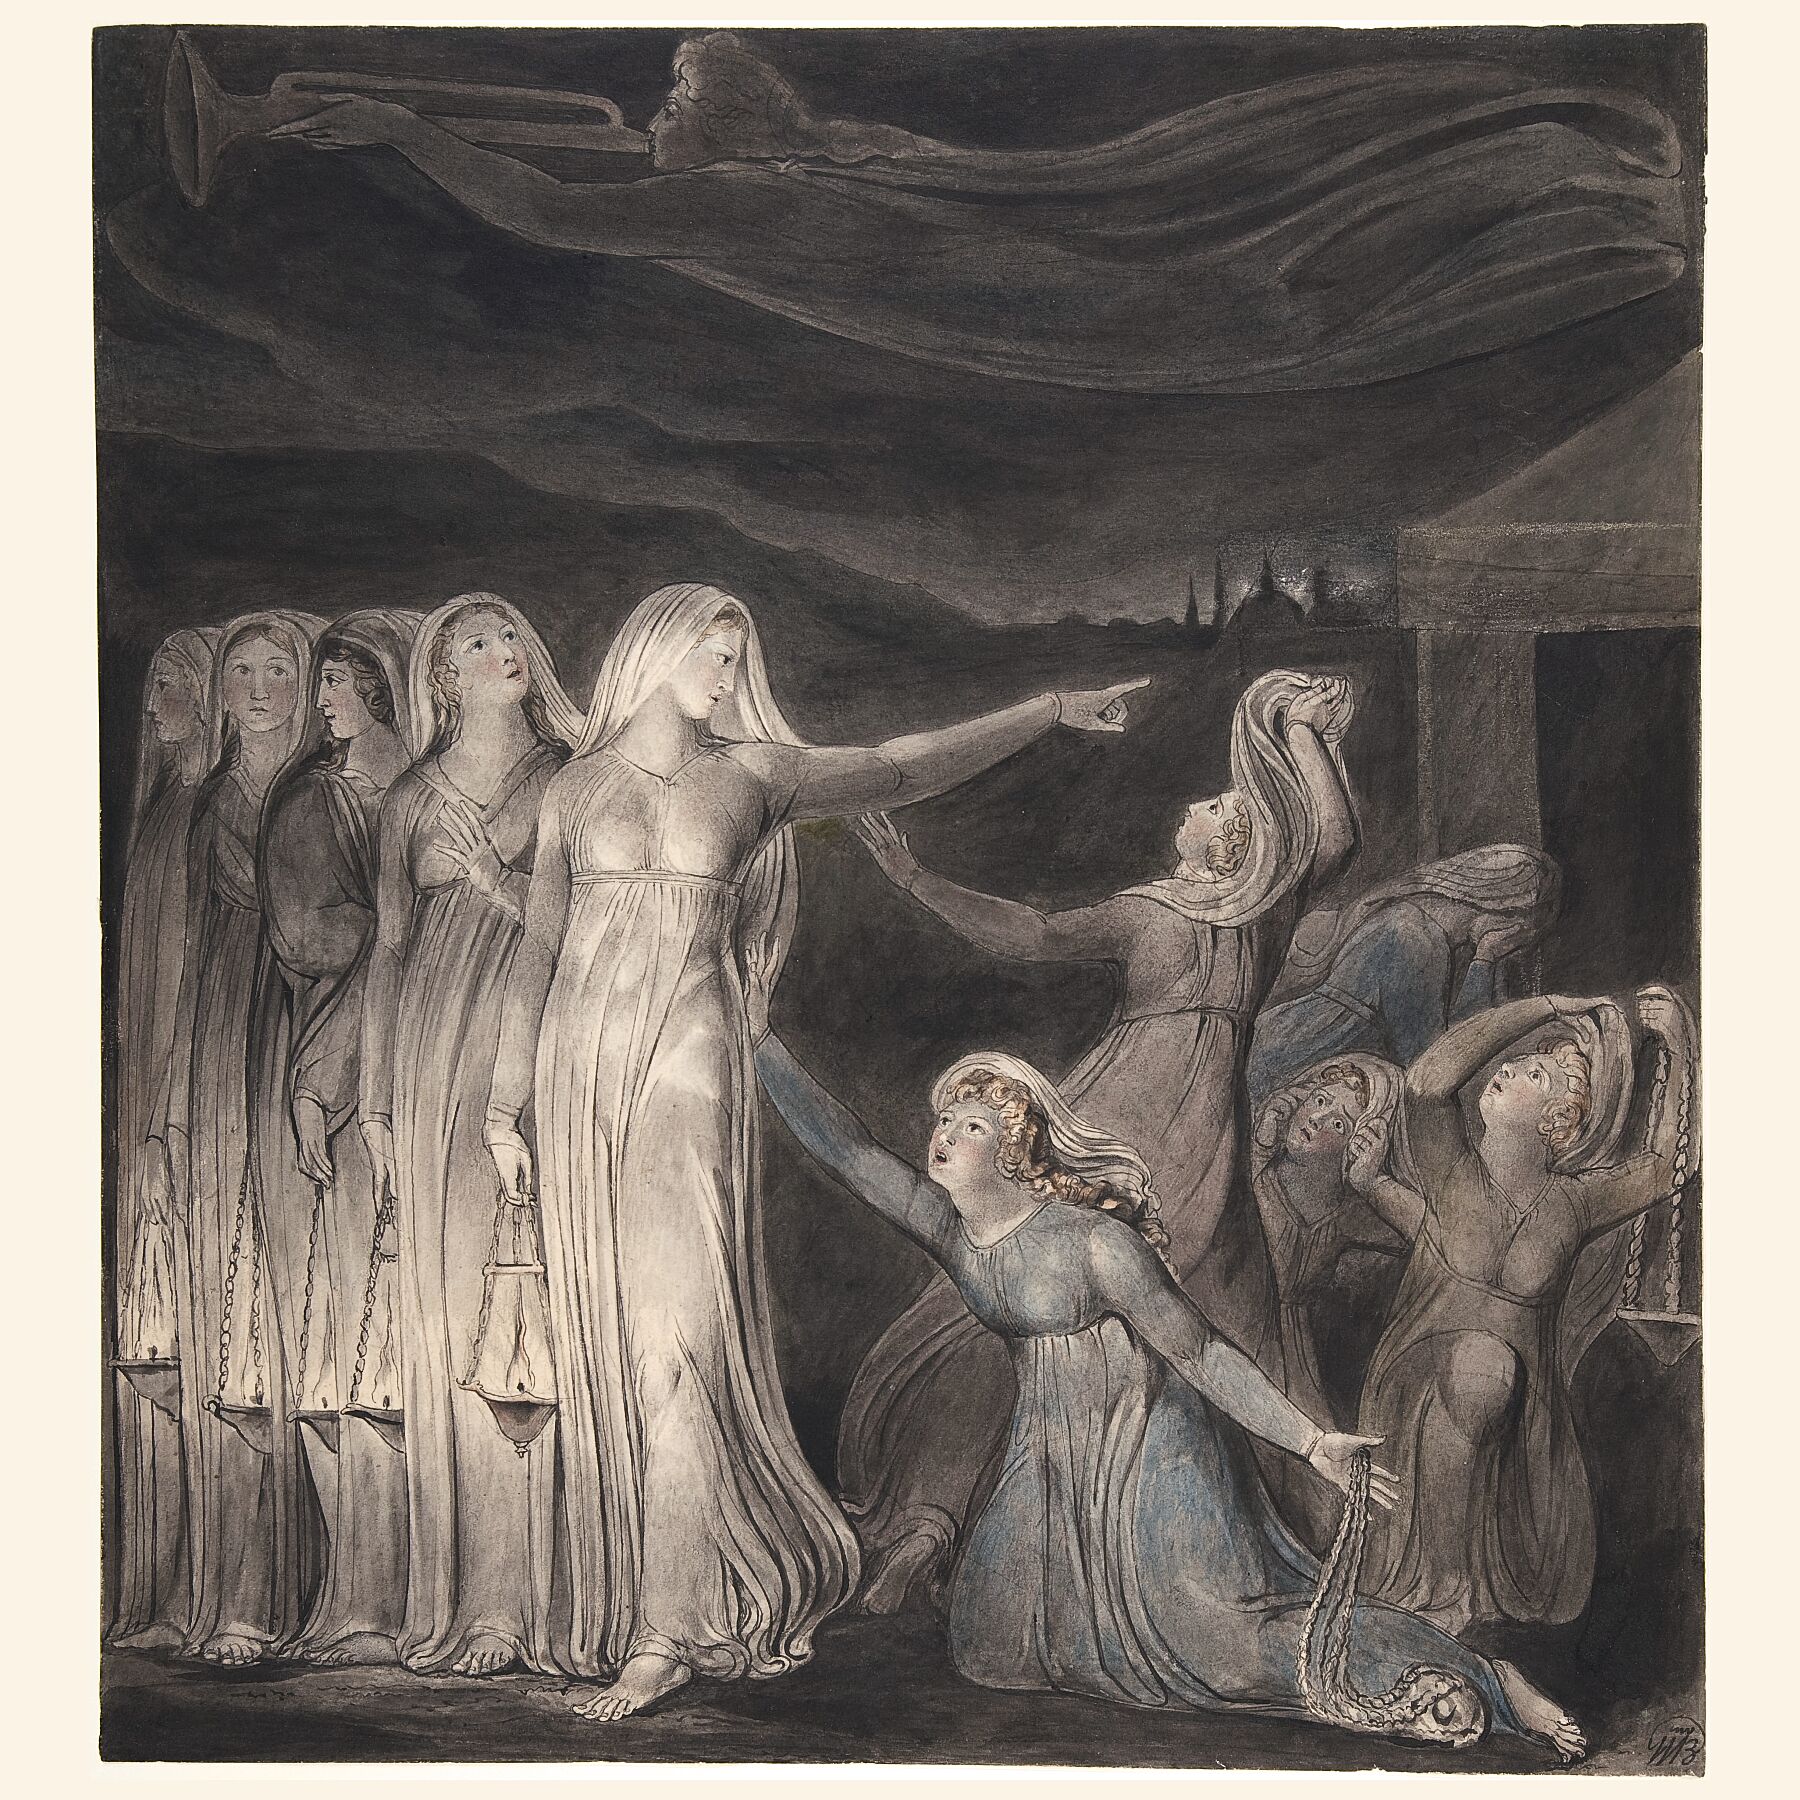 The Parable of the Wise and Foolish Virgins by William Blake - c. 1799–1800